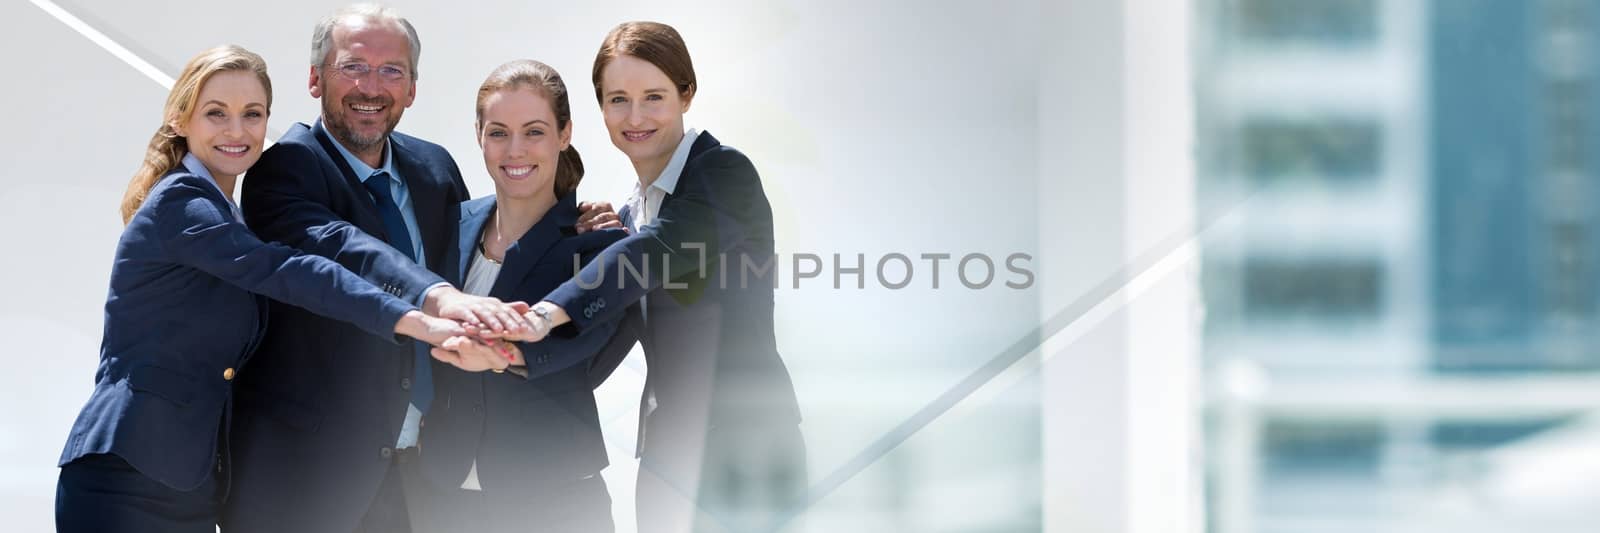 Digital composite of Teamwork transition with business people joining hands